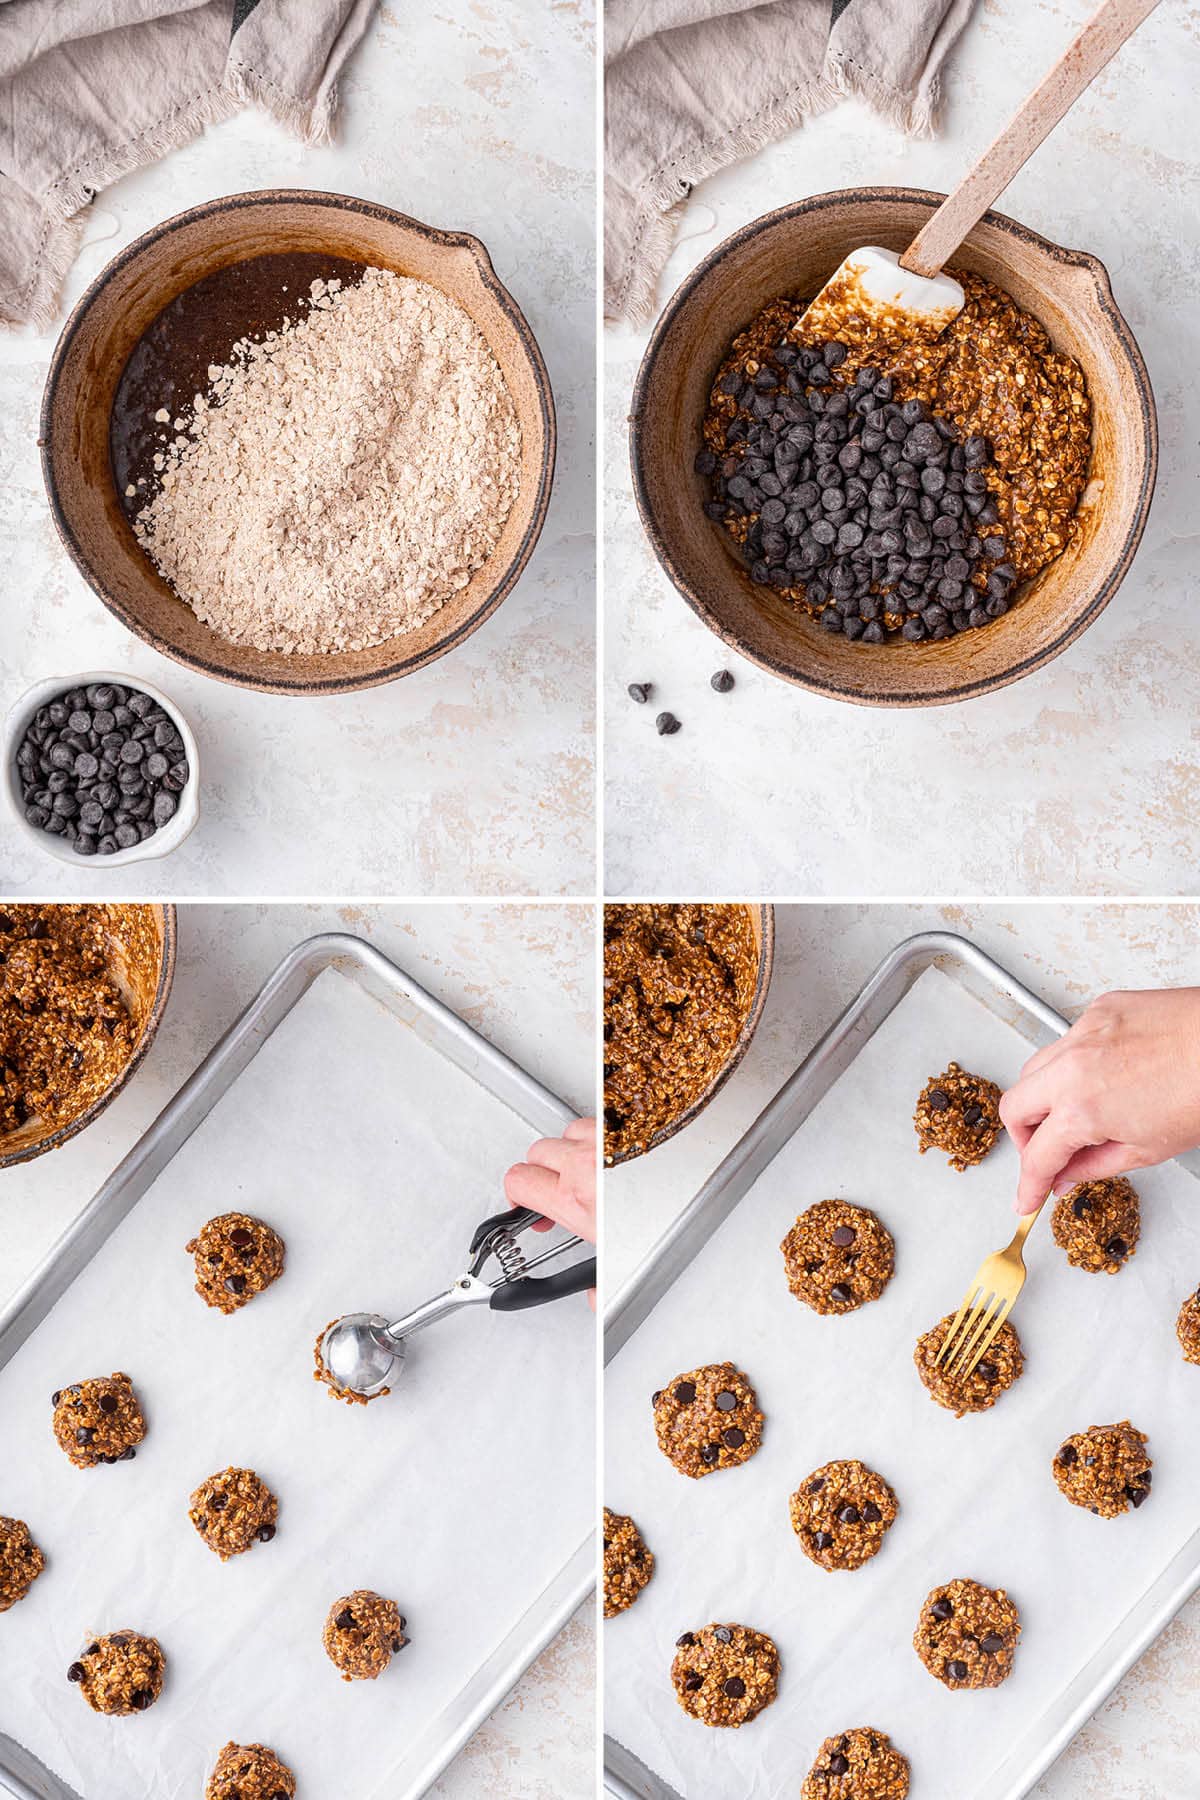 Four photos showing the steps to make Healthy Lactation Cookies: mixing the cookie dough, scooping onto a baking sheet, and pressing the dough slightly down with a fork.